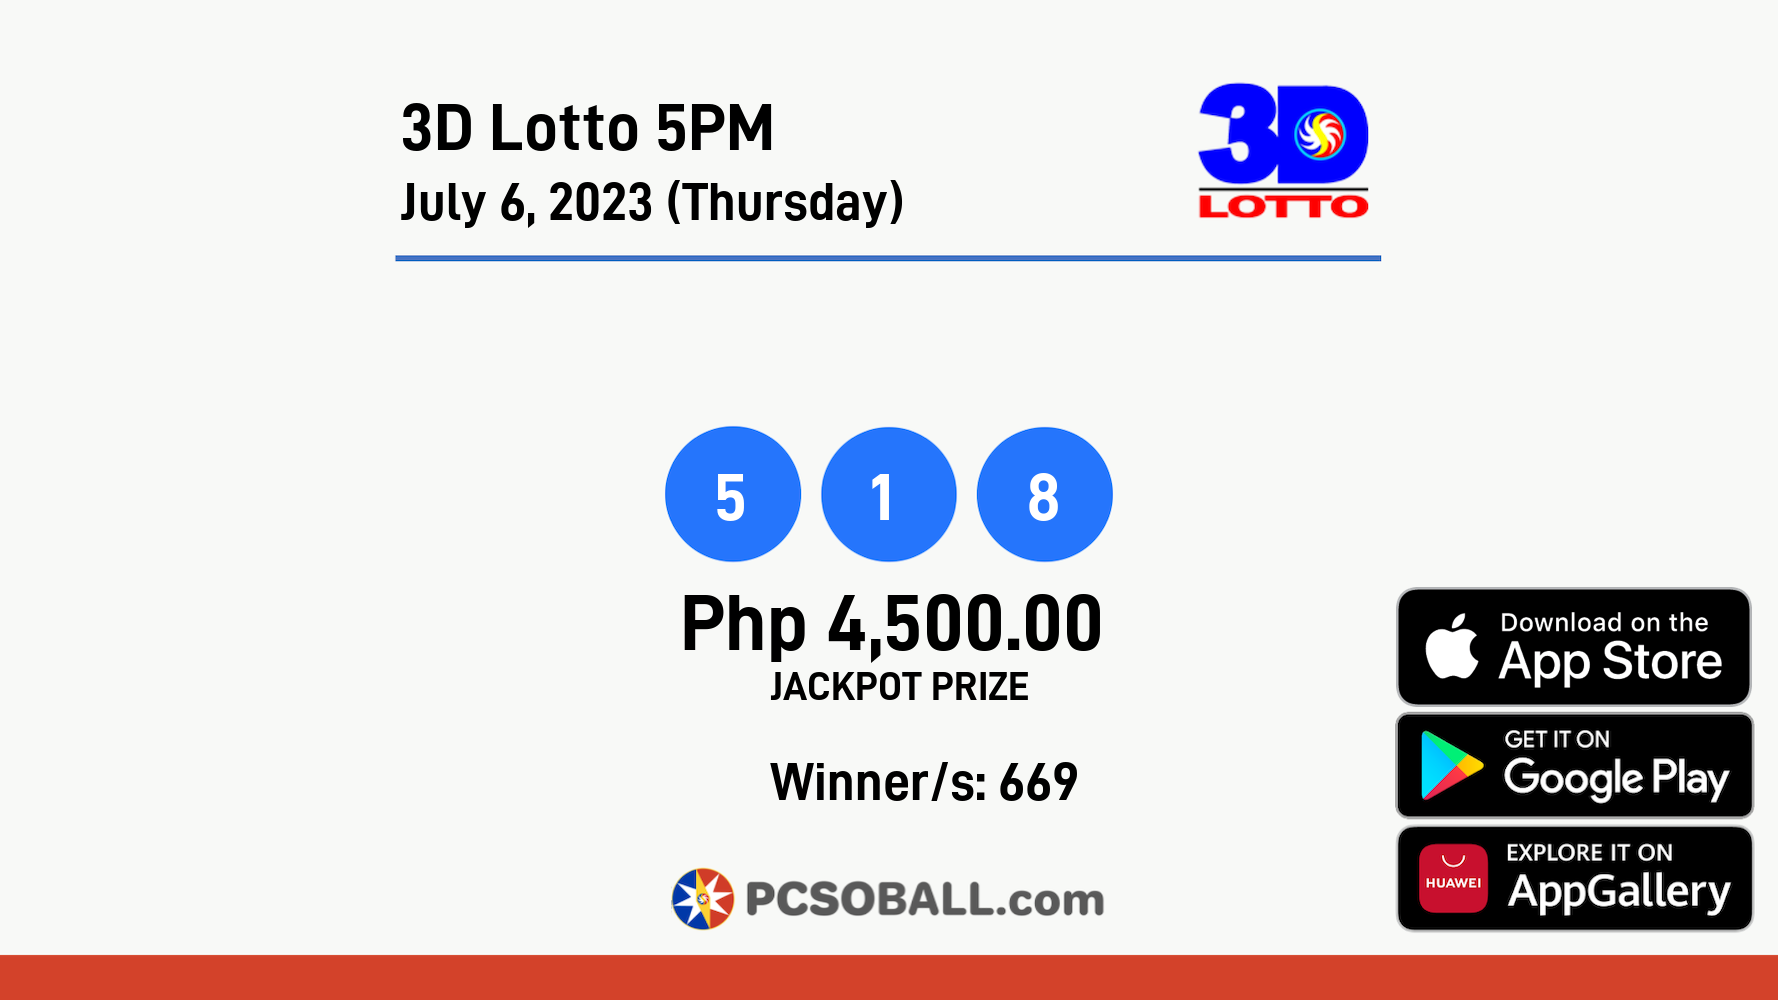 3D Lotto 5PM July 6, 2023 (Thursday) Result